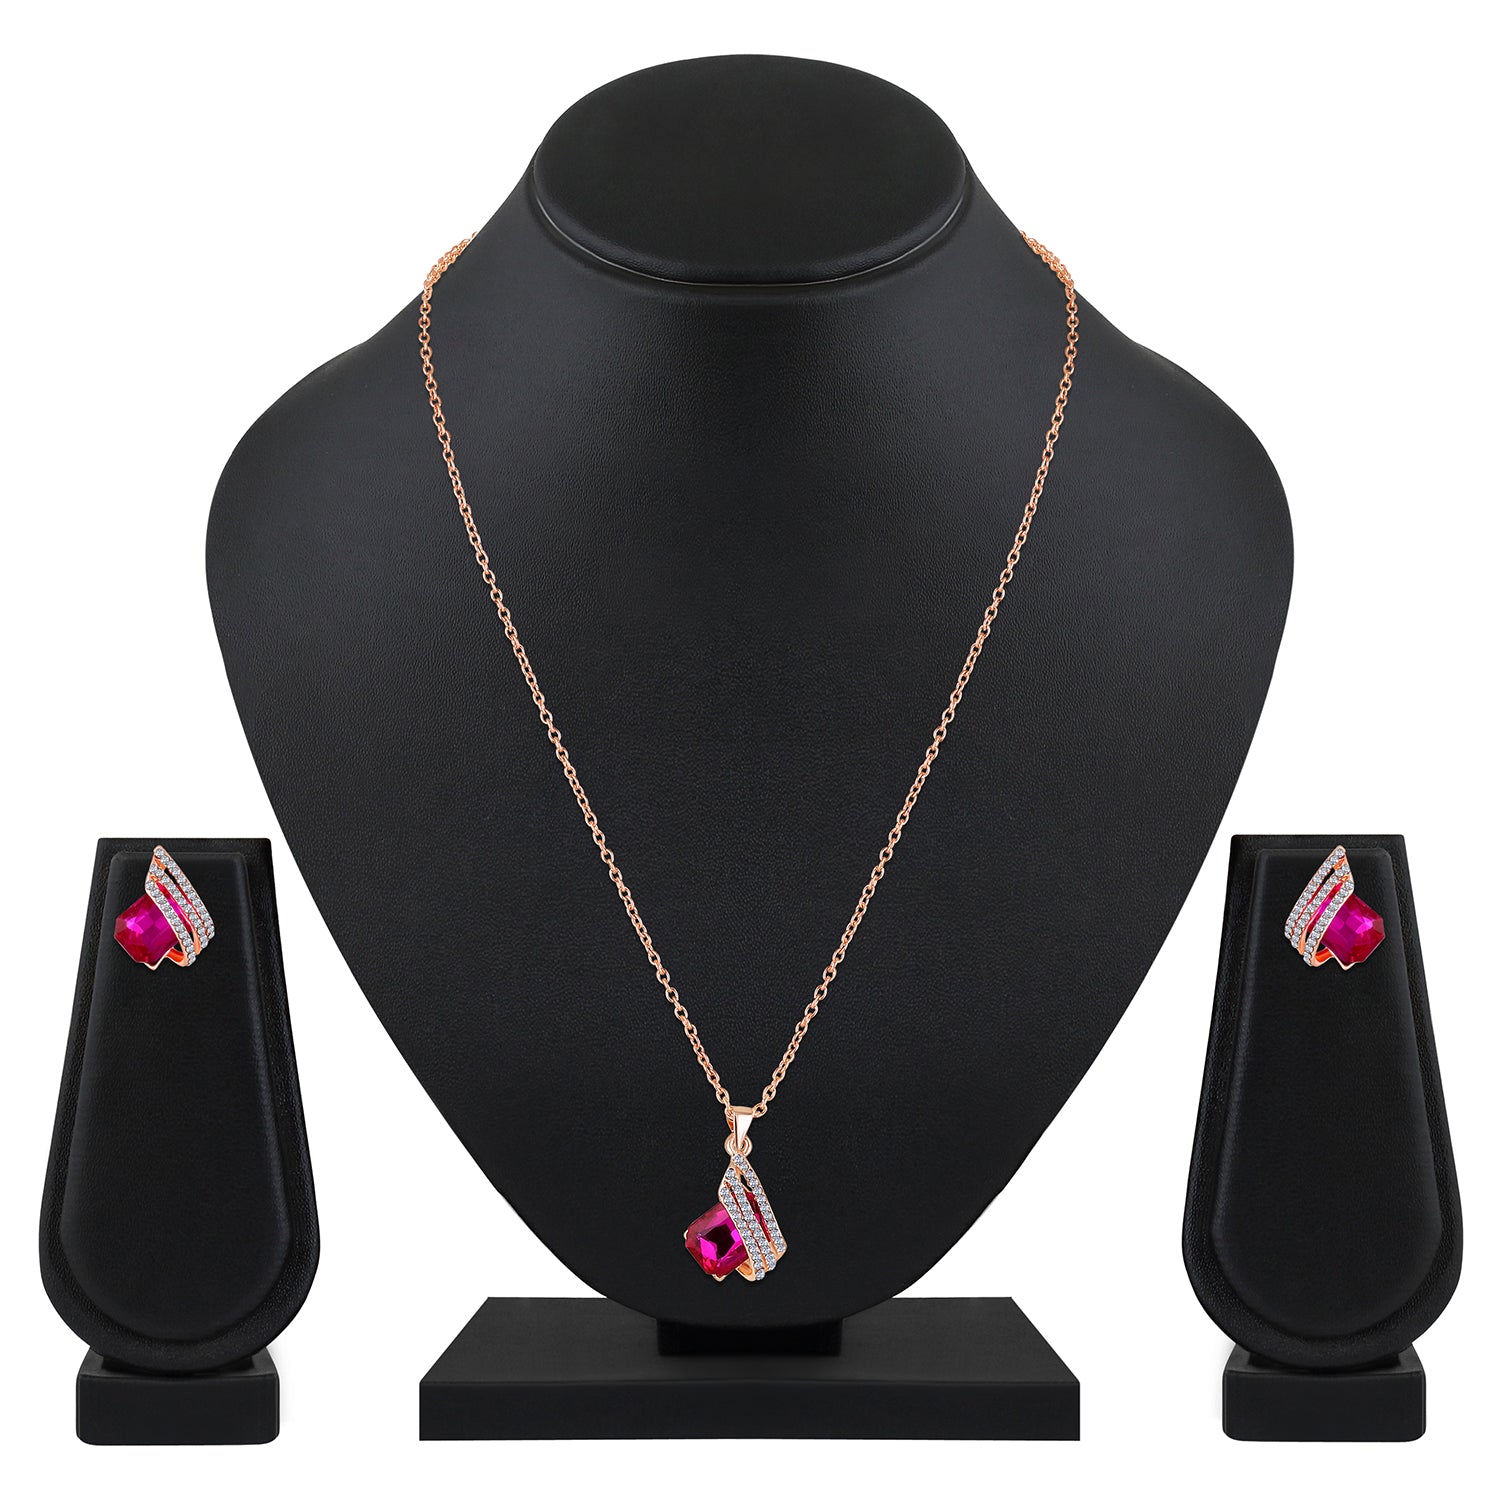 Shining Angel Wings Pink and White Crystal Pendant Necklace Earrings Set